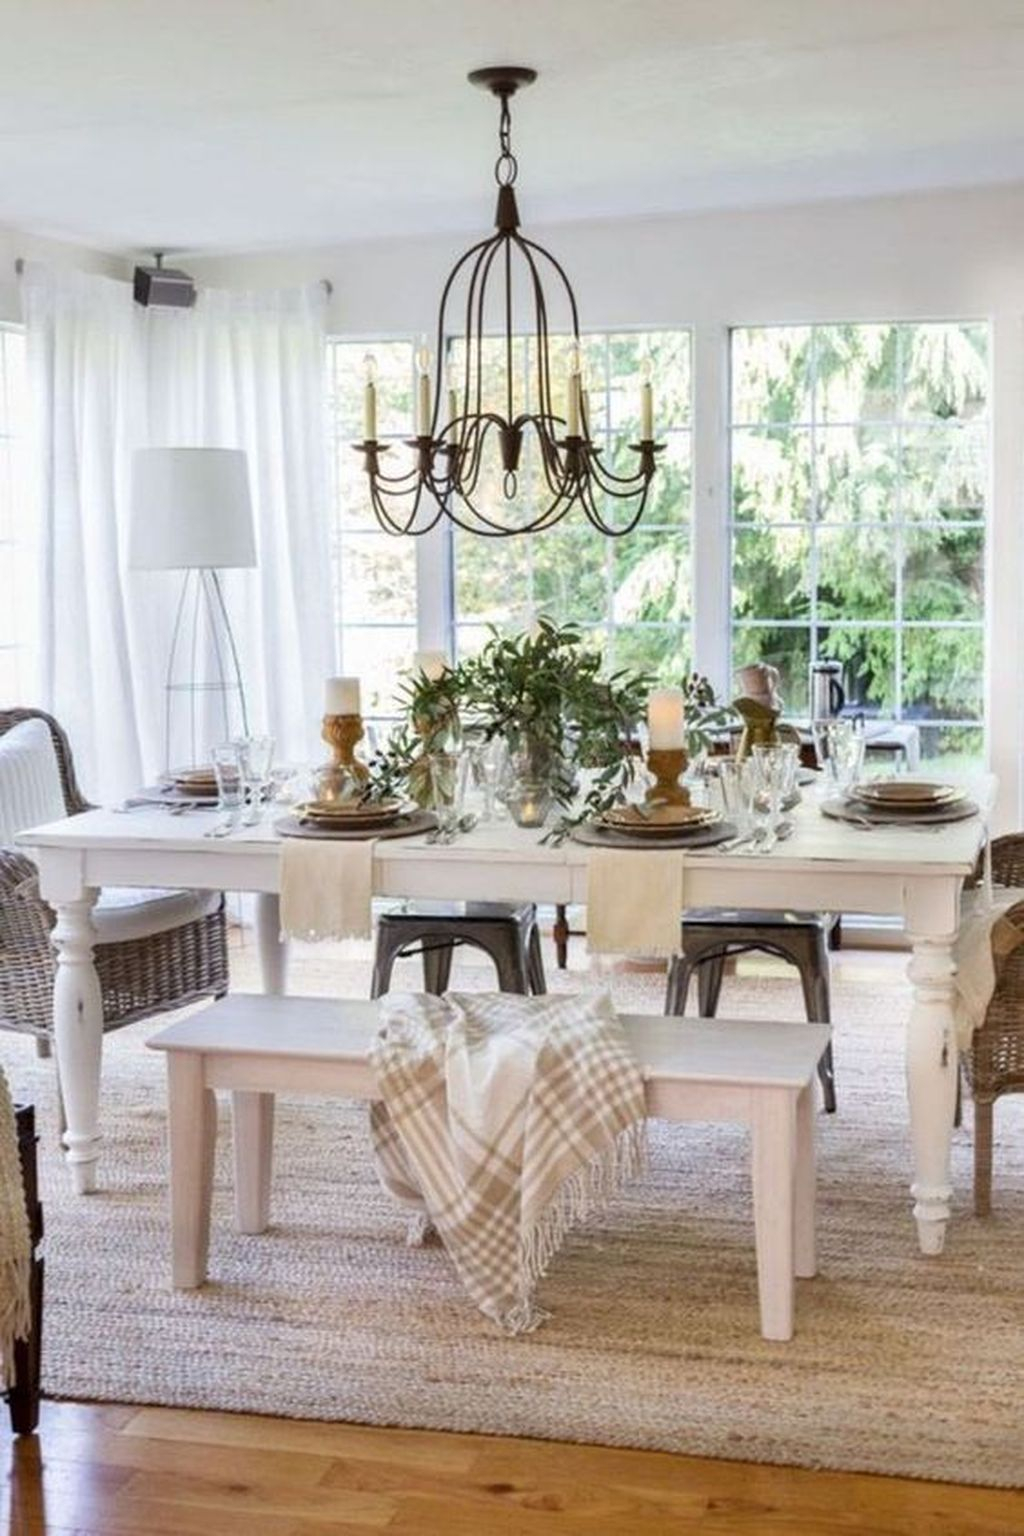 Stunning Country Dining Room Design Ideas12